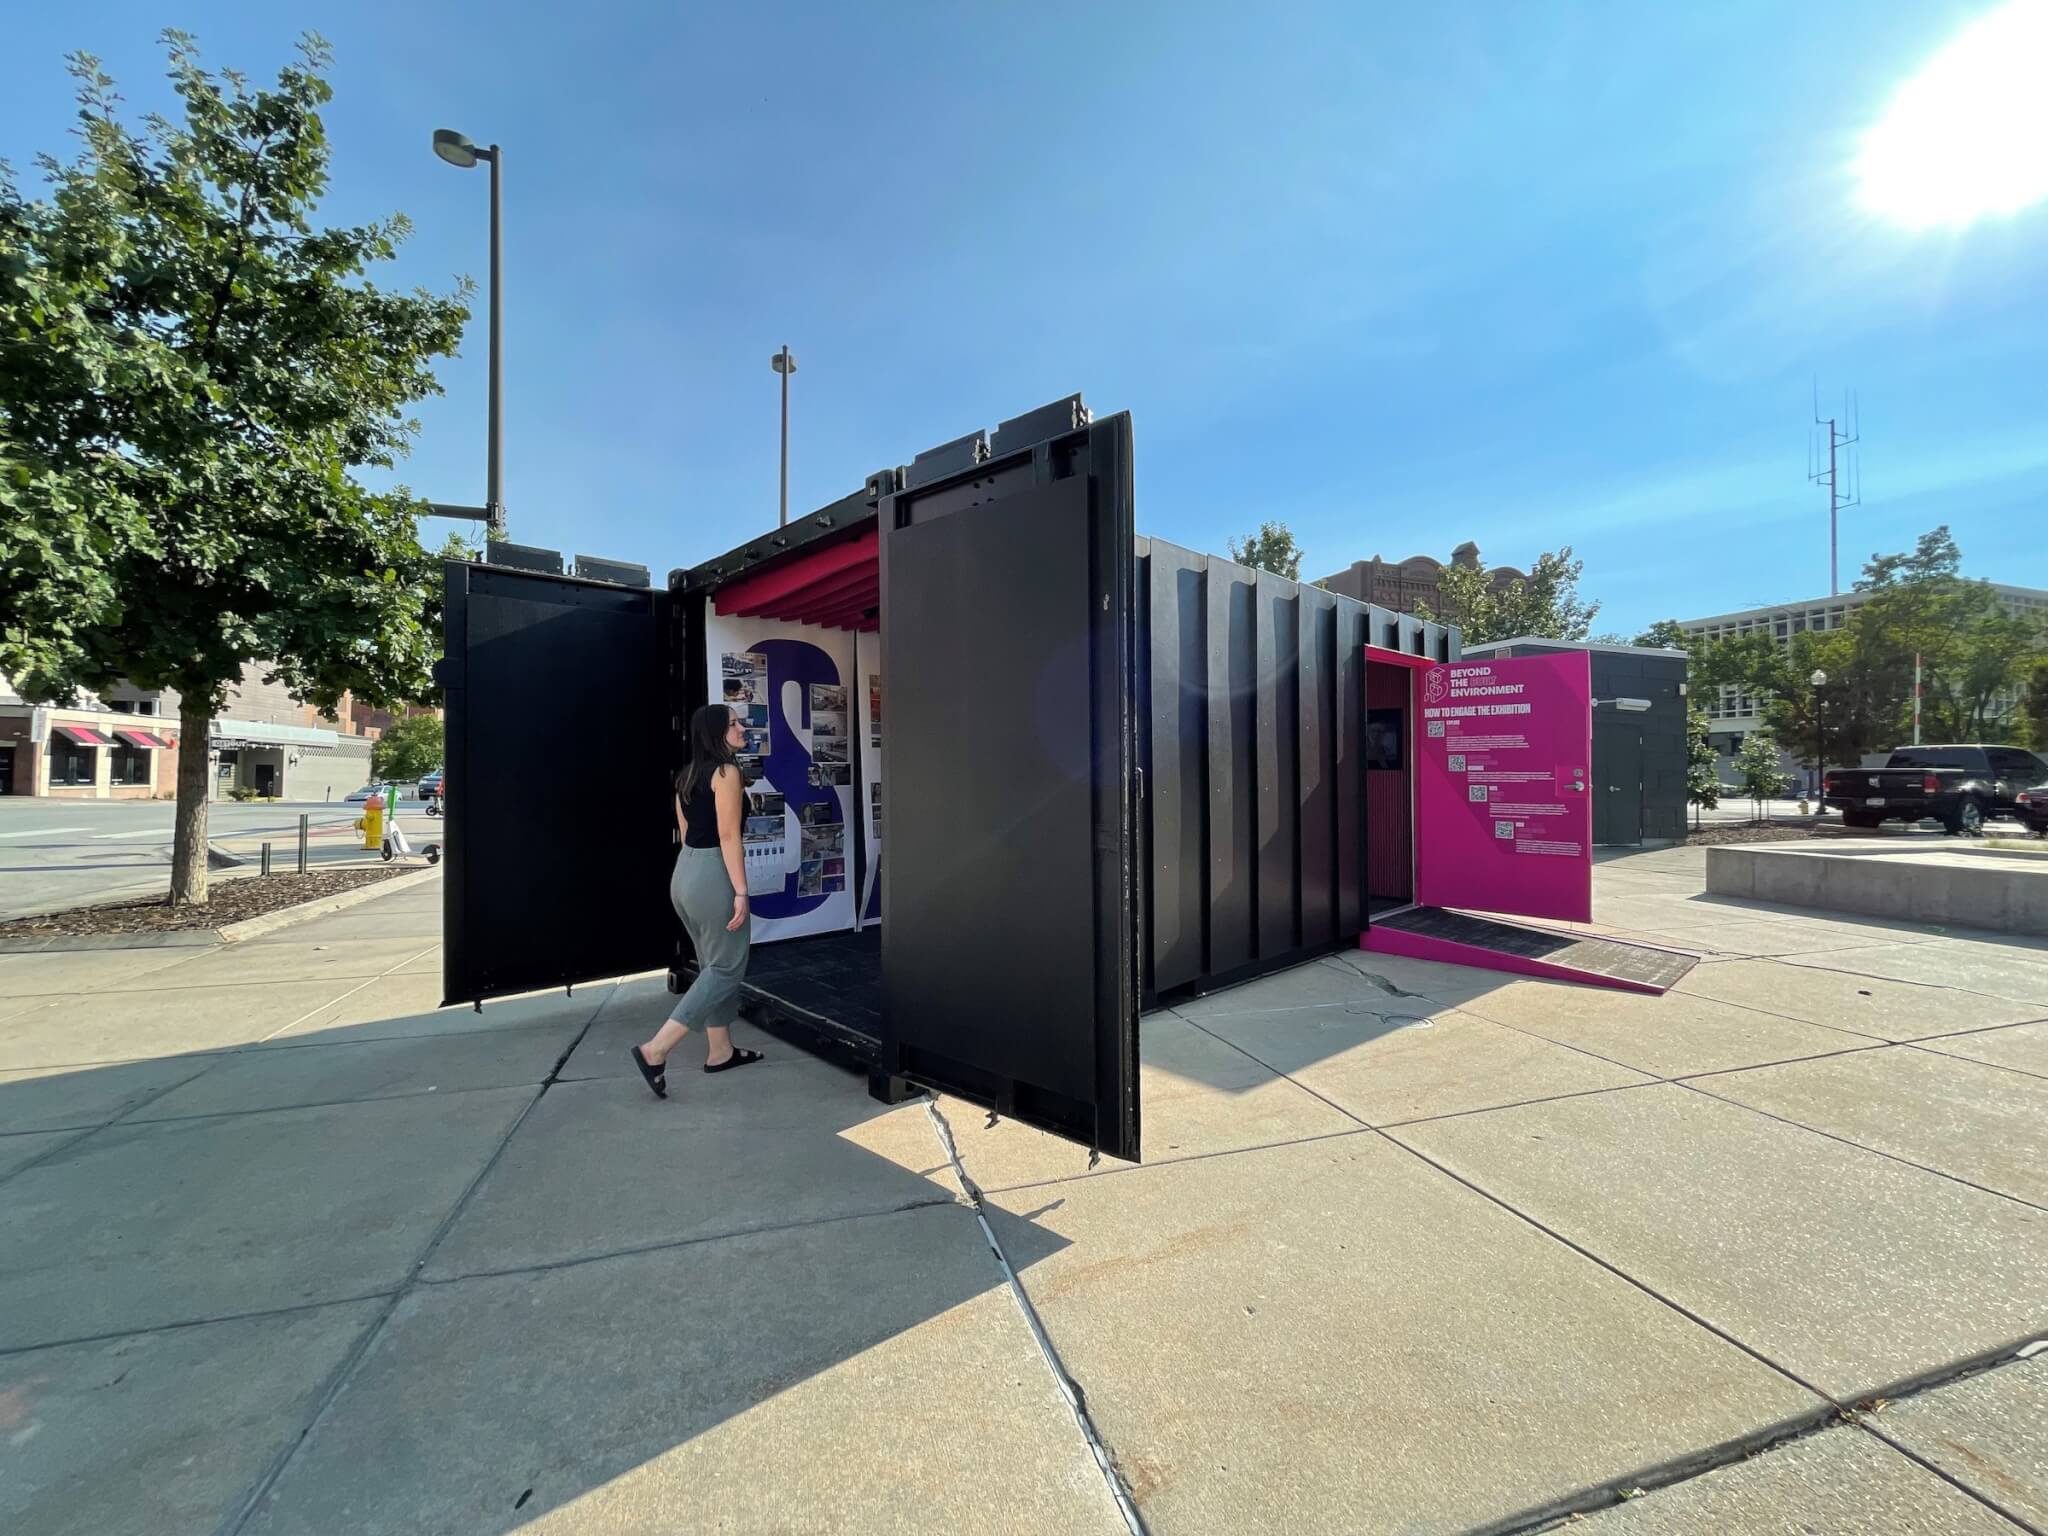 a pop-up design exhibition in a shipping container